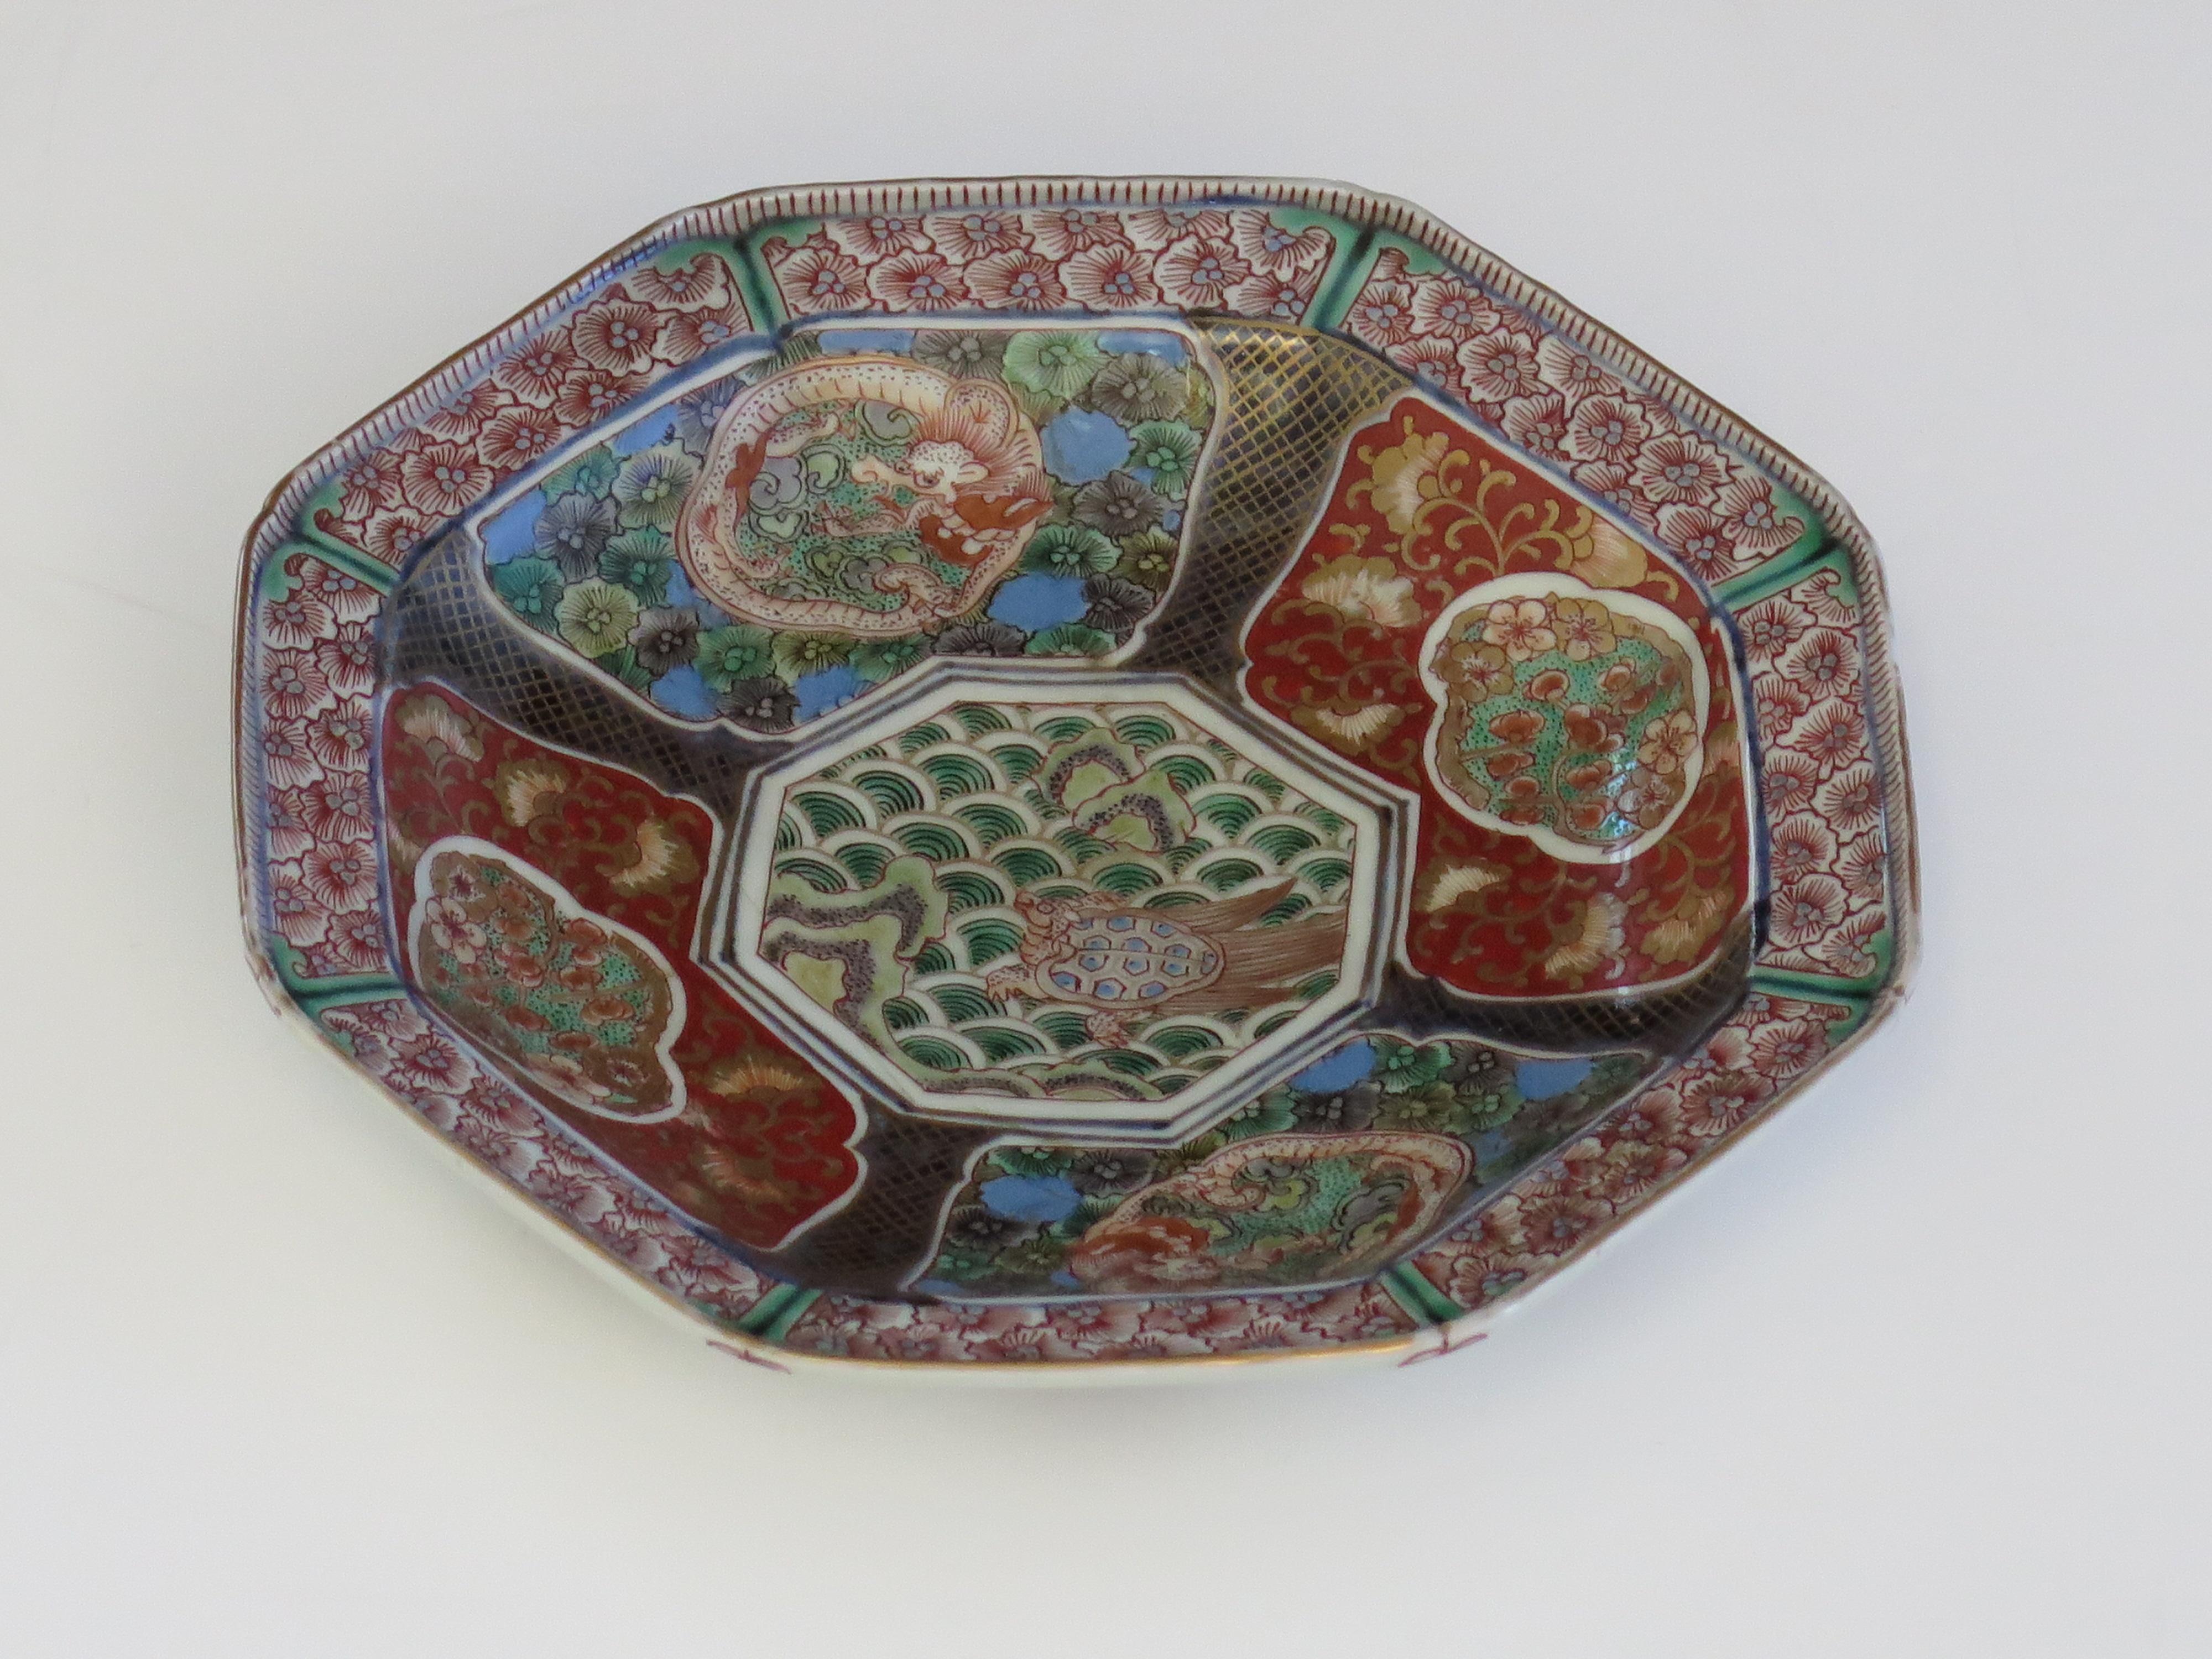 This is a beautiful example of a Japanese, Arita- Imari porcelain Dish or Plate with finely hand painted decoration, dating to the Edo period circa 1770 or possibly earlier.

This dish or plate is well potted in an octagonal shape with a raised rim